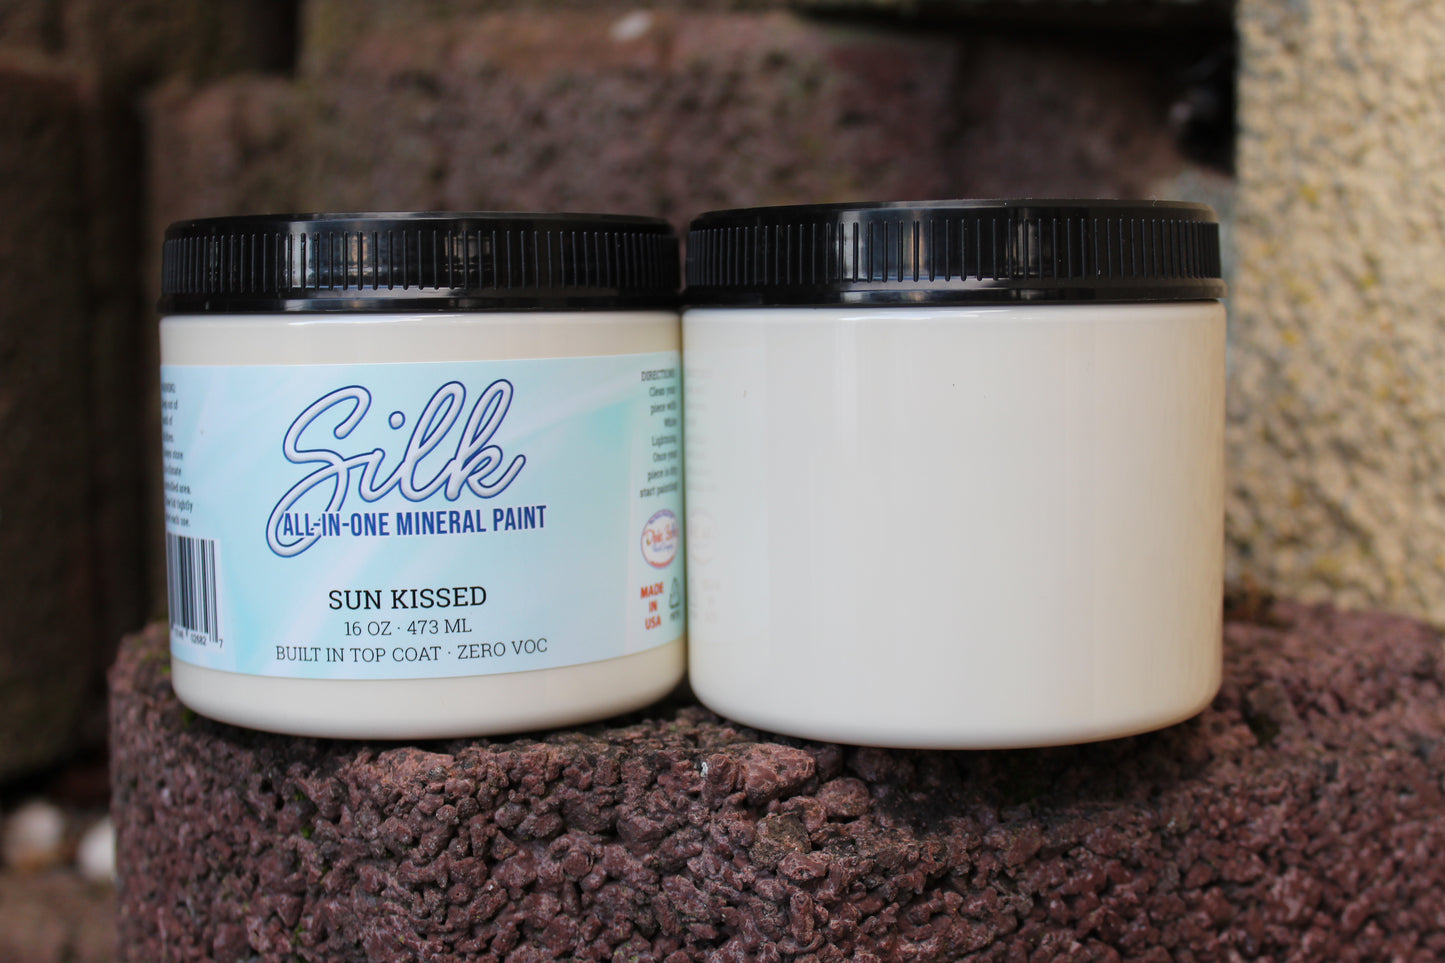 Sun Kissed Silk All-In-One Mineral Paint